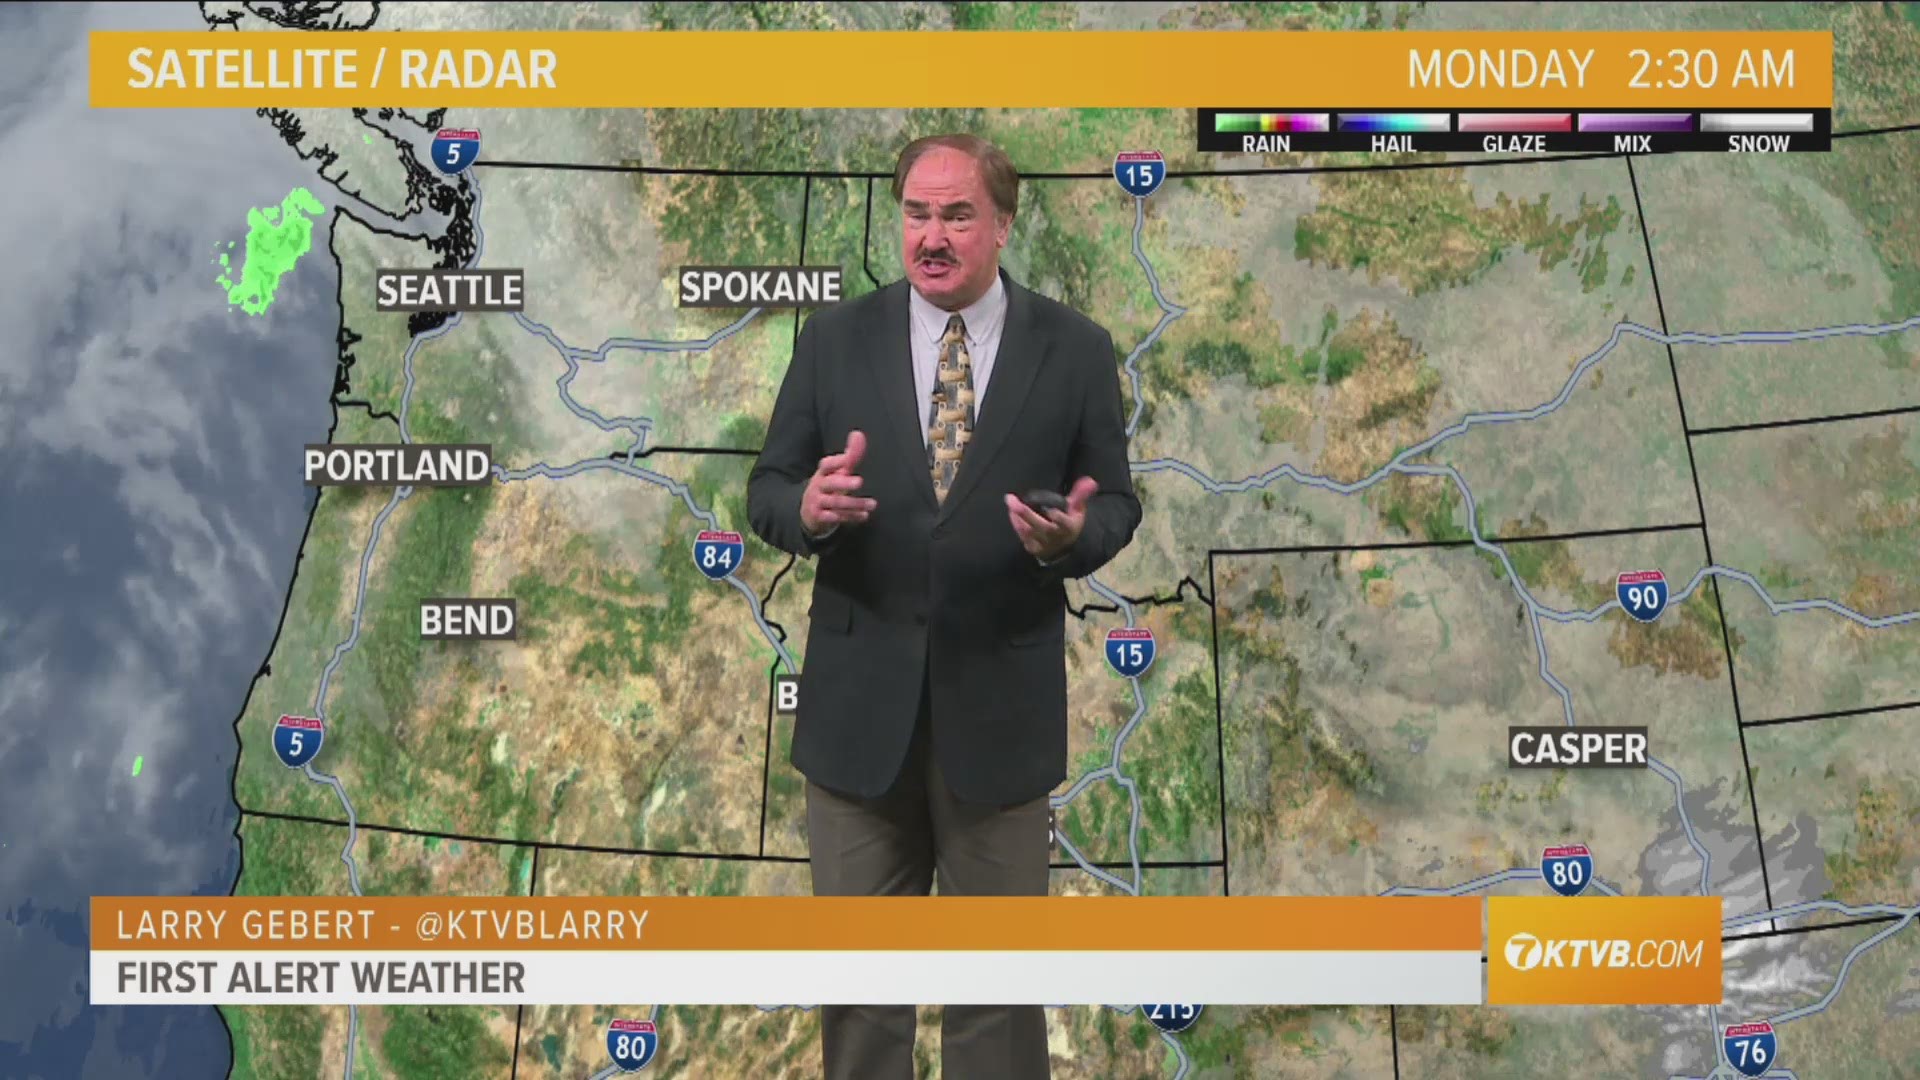 Larry Gebert says sunny skies with temps above normal for this time of year.